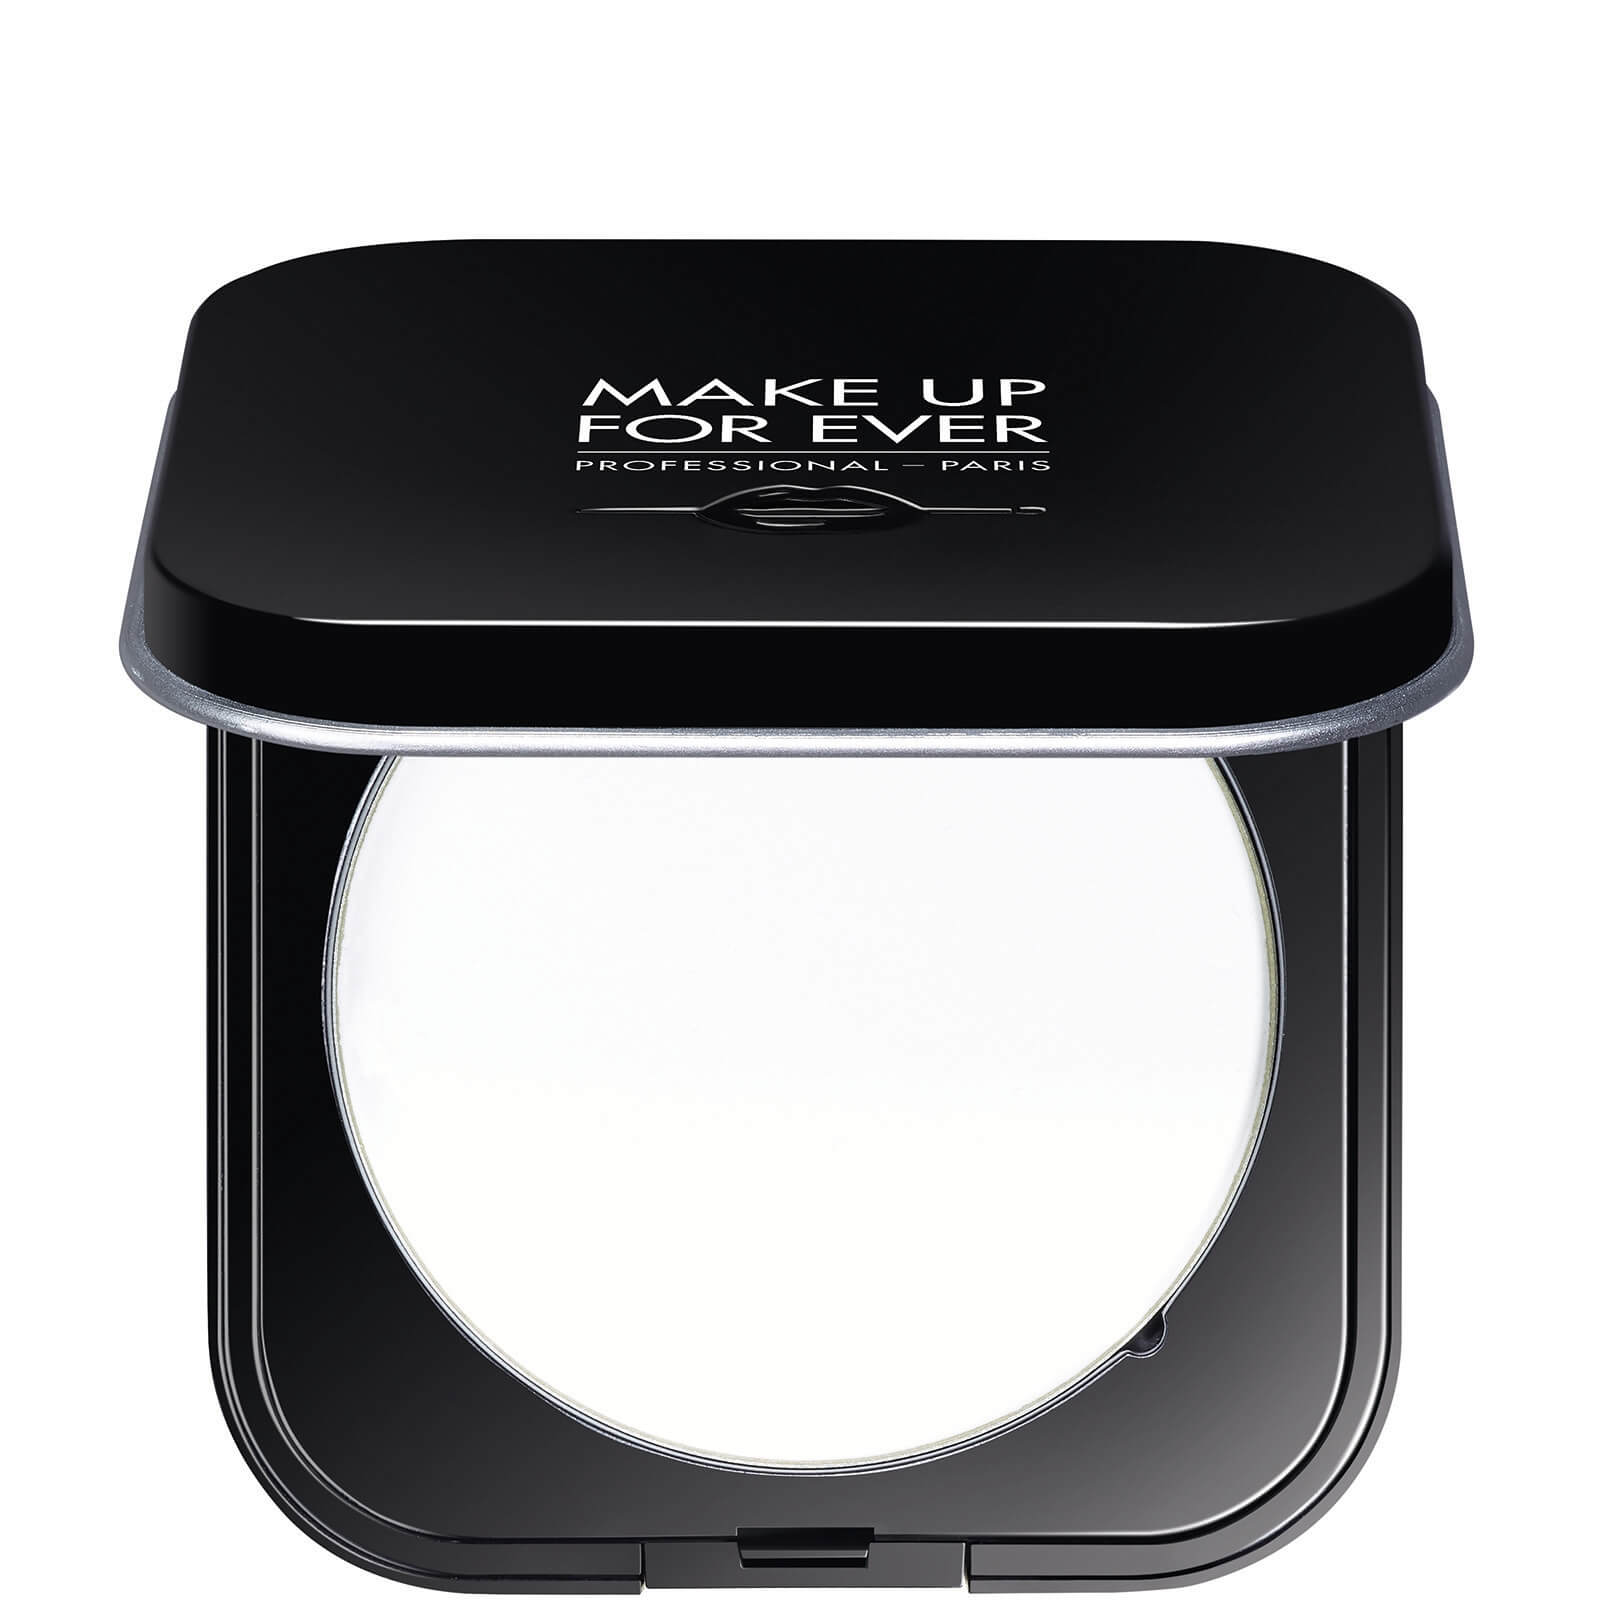 MAKE UP FOR EVER ultra Hd Microfinishing Pressed Powder 6.2g (Various Shades) - - 01 Translucent